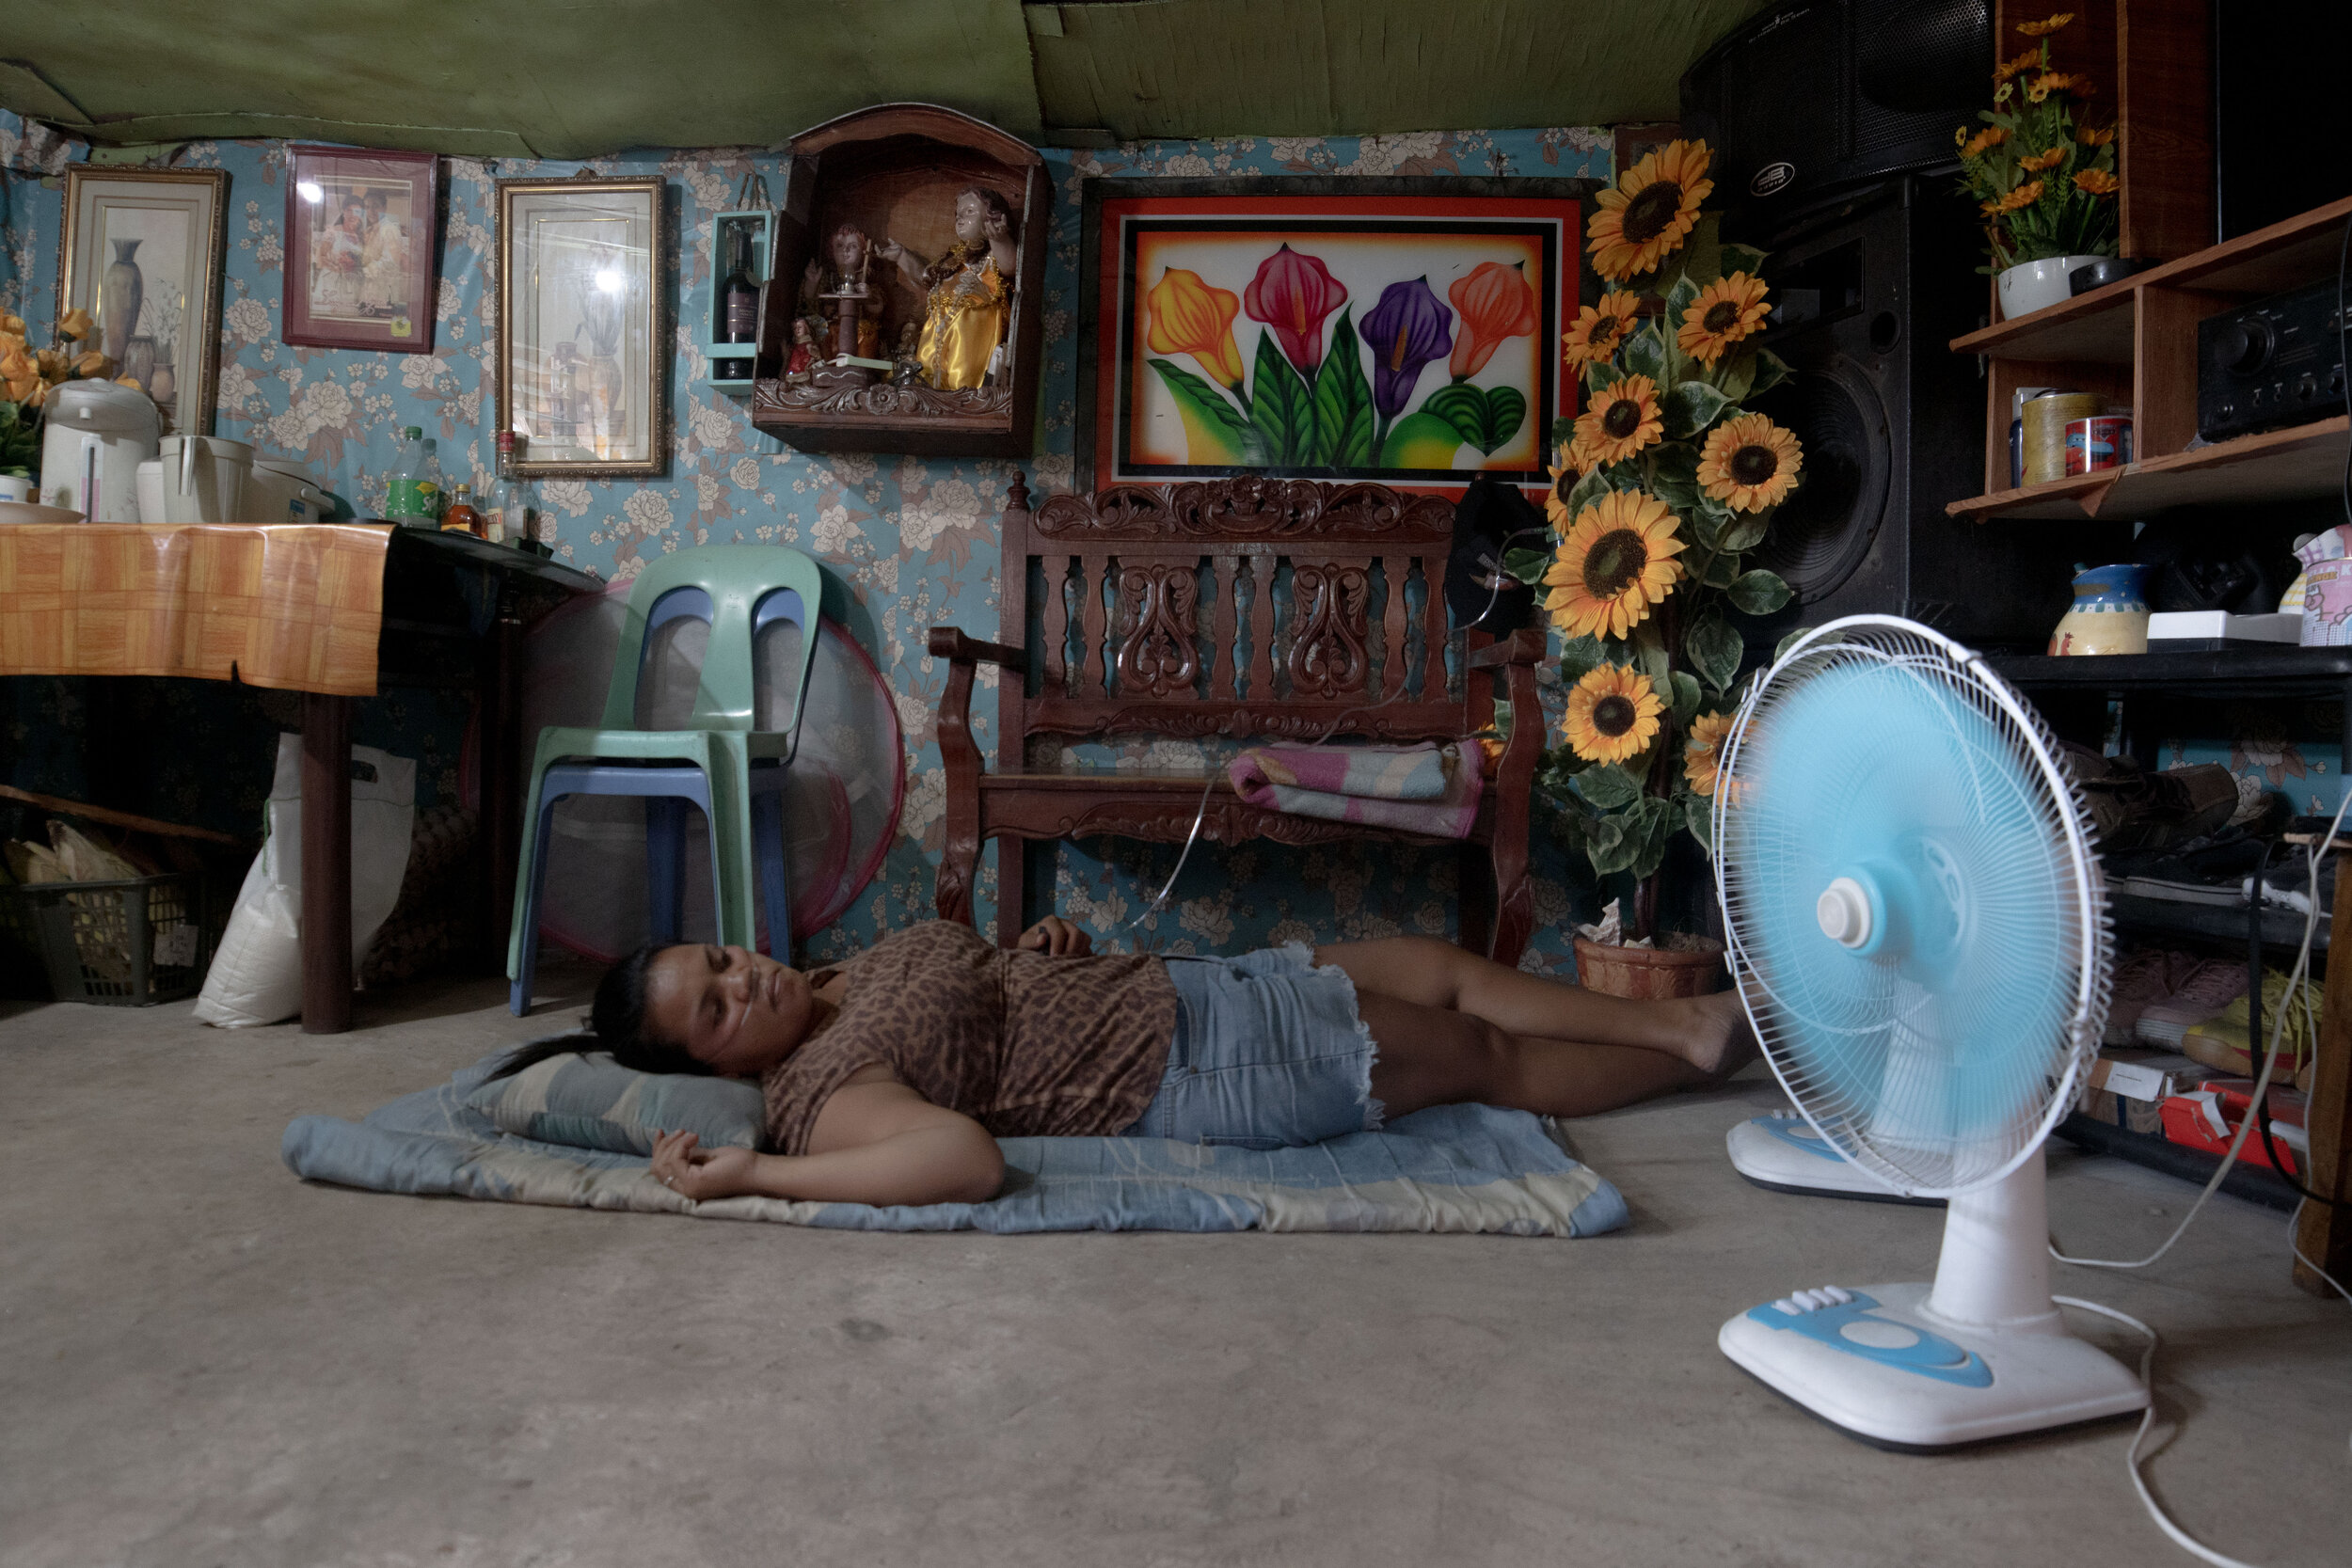  Due to her heart condition, Lucila Buladaco uses a portable oxygen cylinder at her home in Smokey Mountain, Manila on March 27, 2021. Her doctor discouraged her from performing strenuous activities. At home, her family, nephew, and nieces do most of